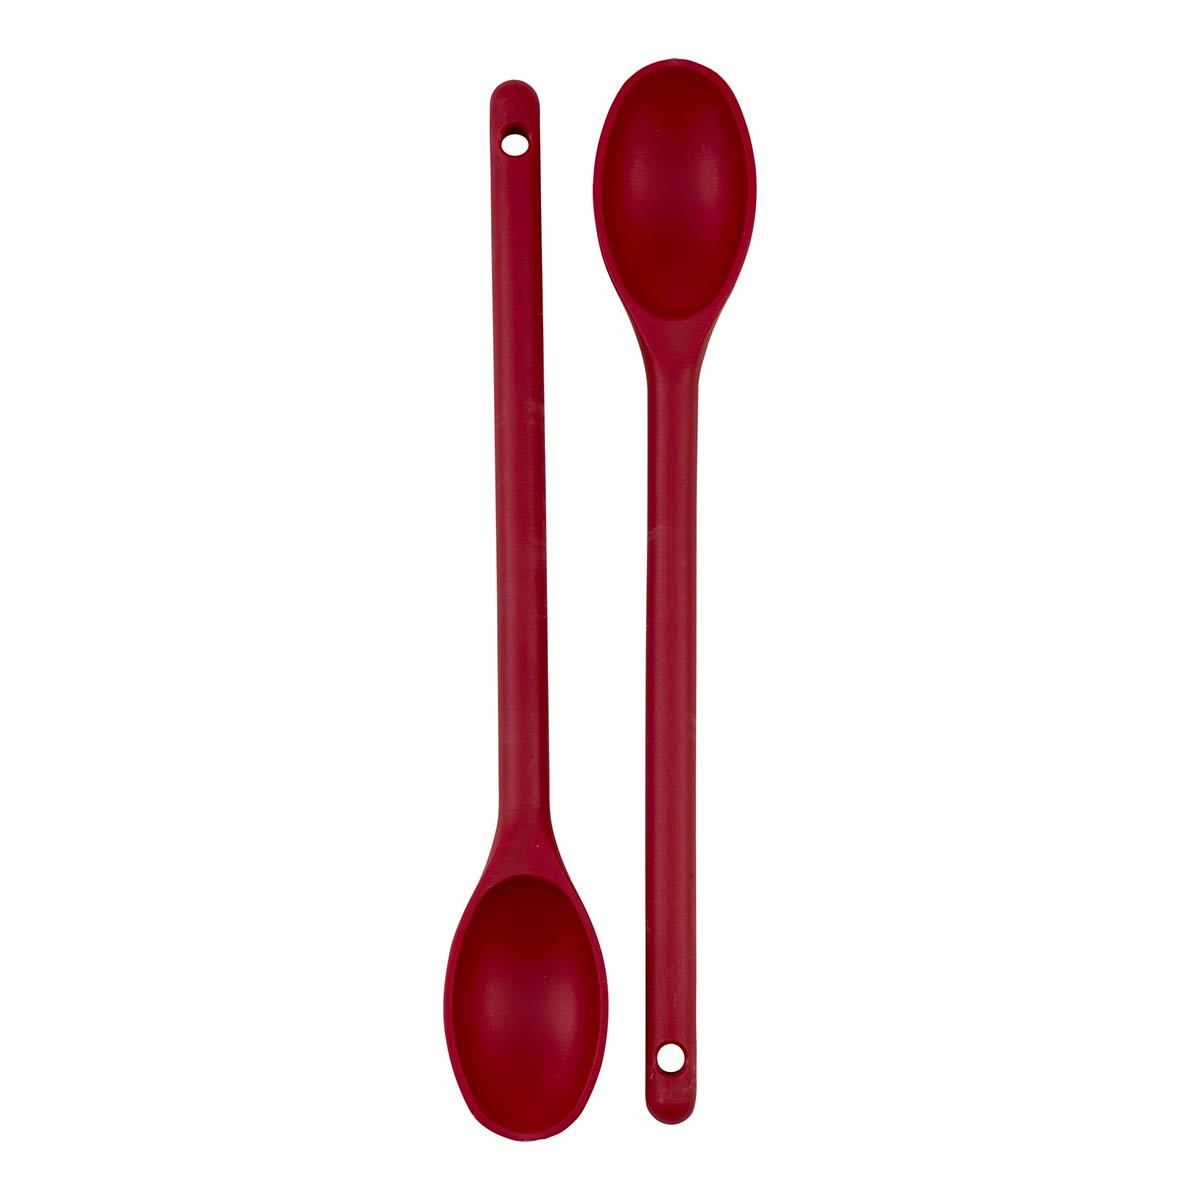 Cook Works - Silicone Specialty Tongs, 2-Pack